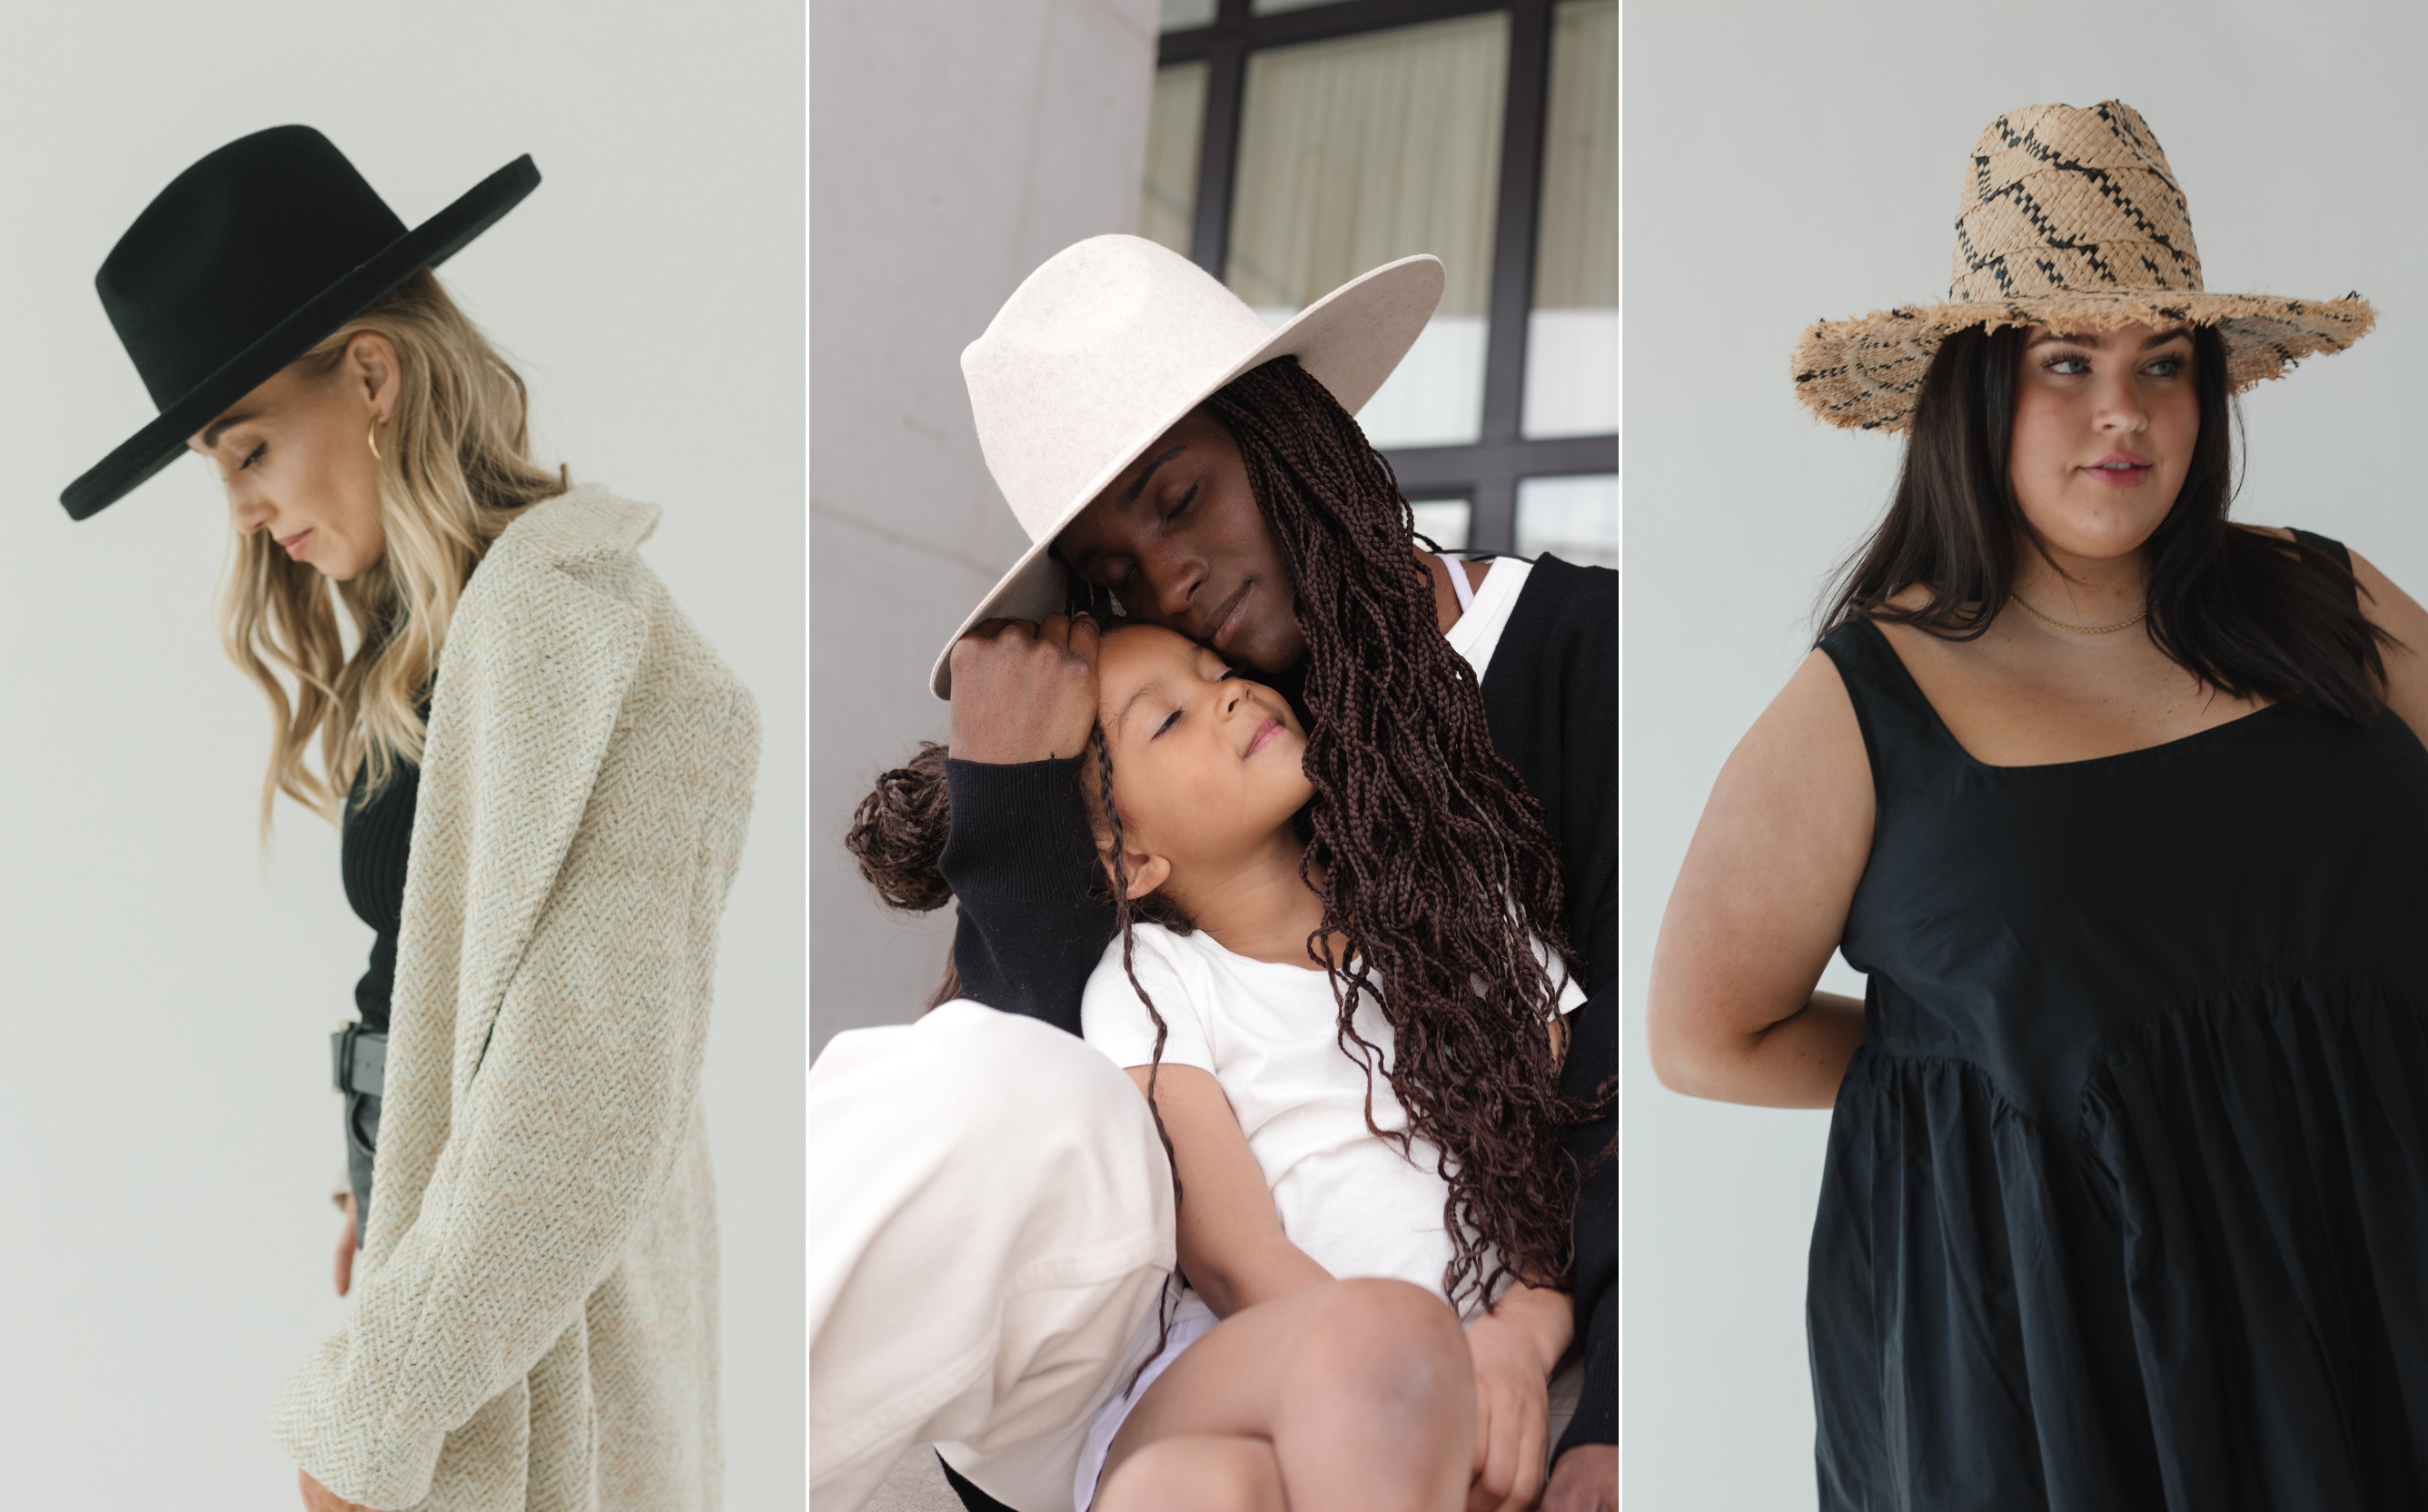 Three images of women wearing a different hat color